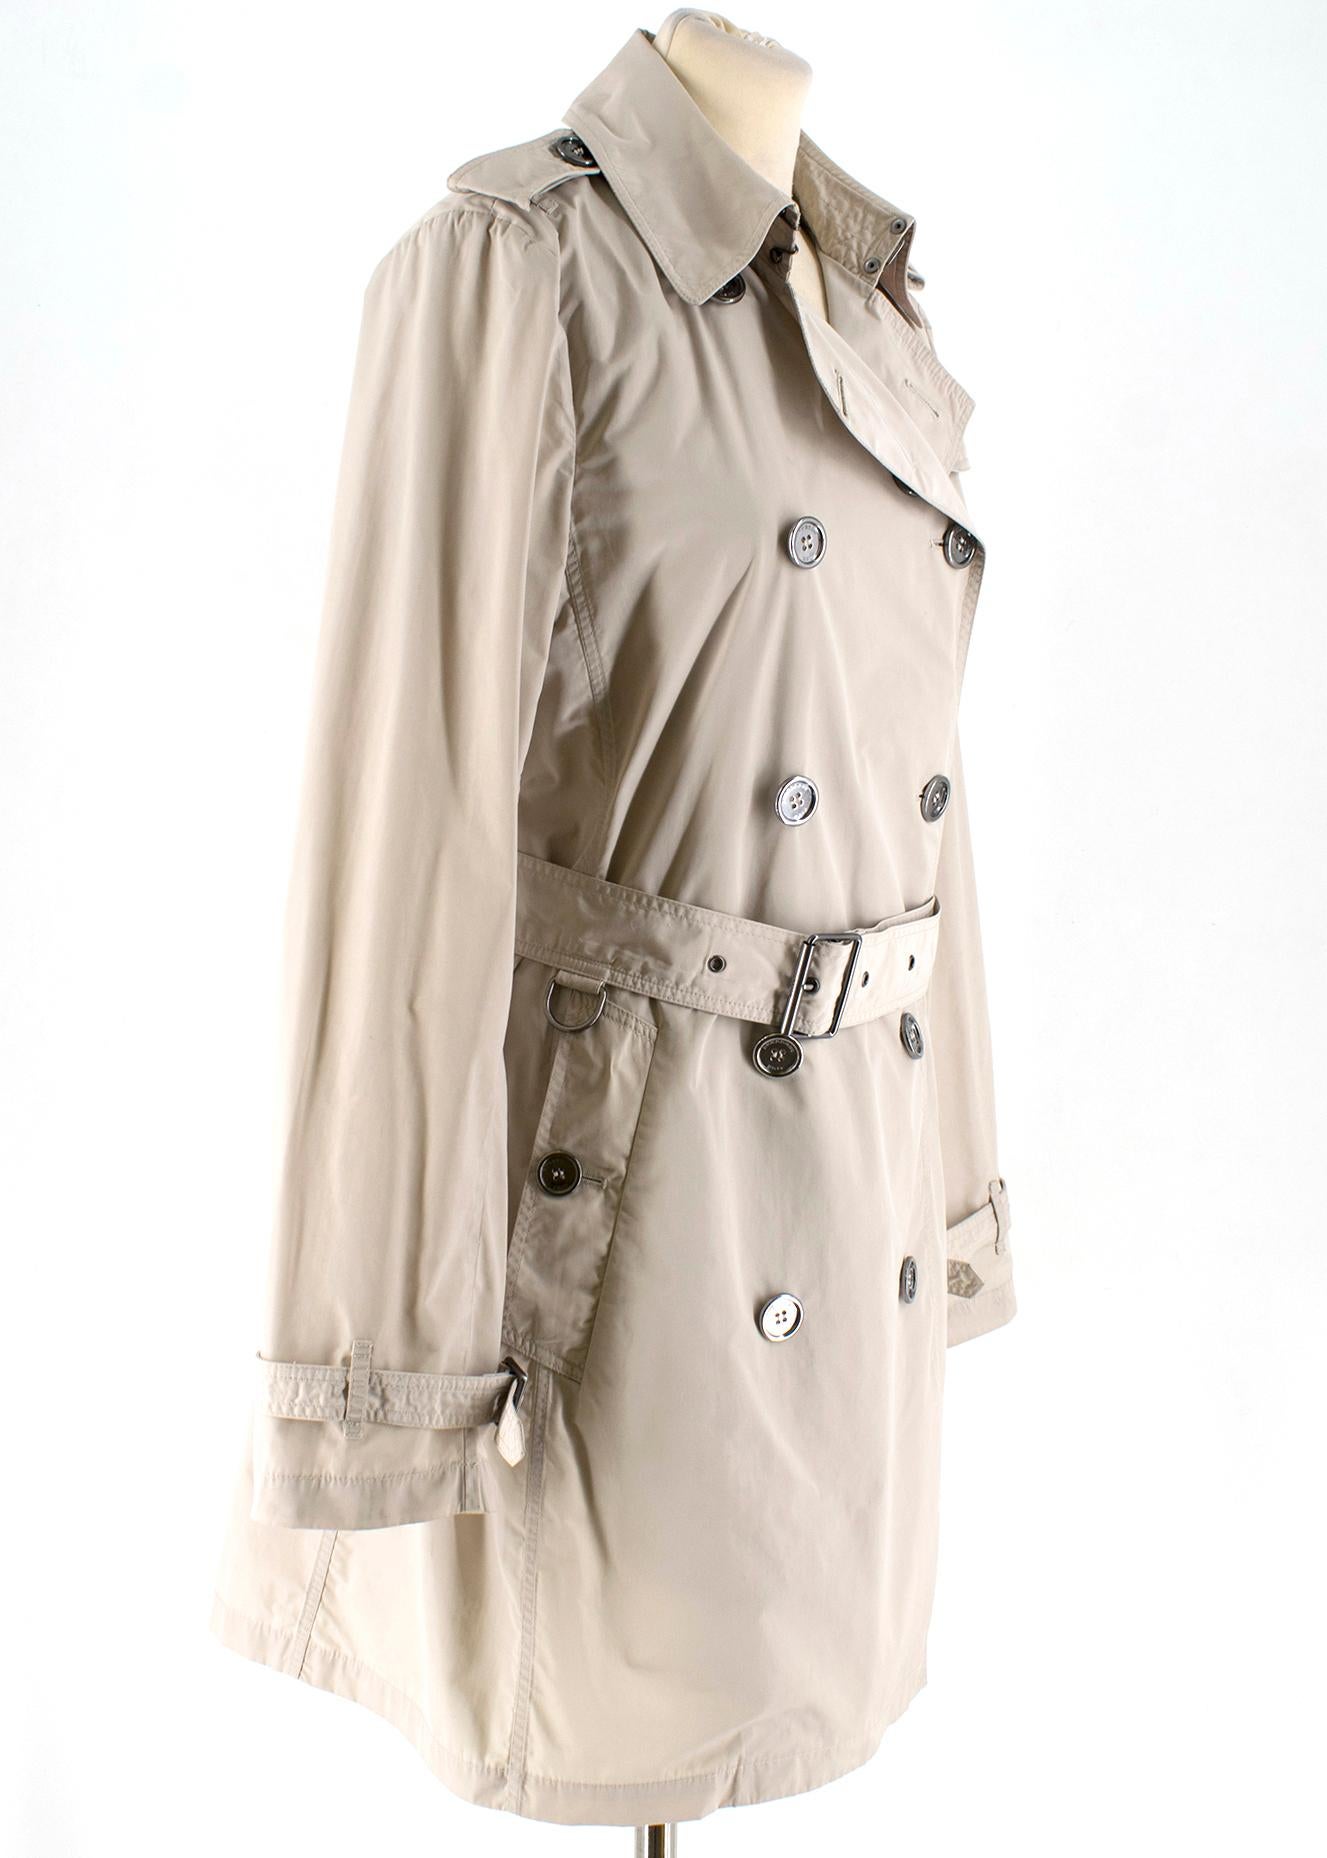 Burberry Beige Double-breasted Trench Coat 

Double-breasted trench coat in beige

Features: 
- Belted cuffs
- D-ring belt
- Silver hardware
- Burberry check under collar 

Approx: 

Length: 85 cm 
Chest: 45 cm 
Shoulder length: 40 cm 
Measurements